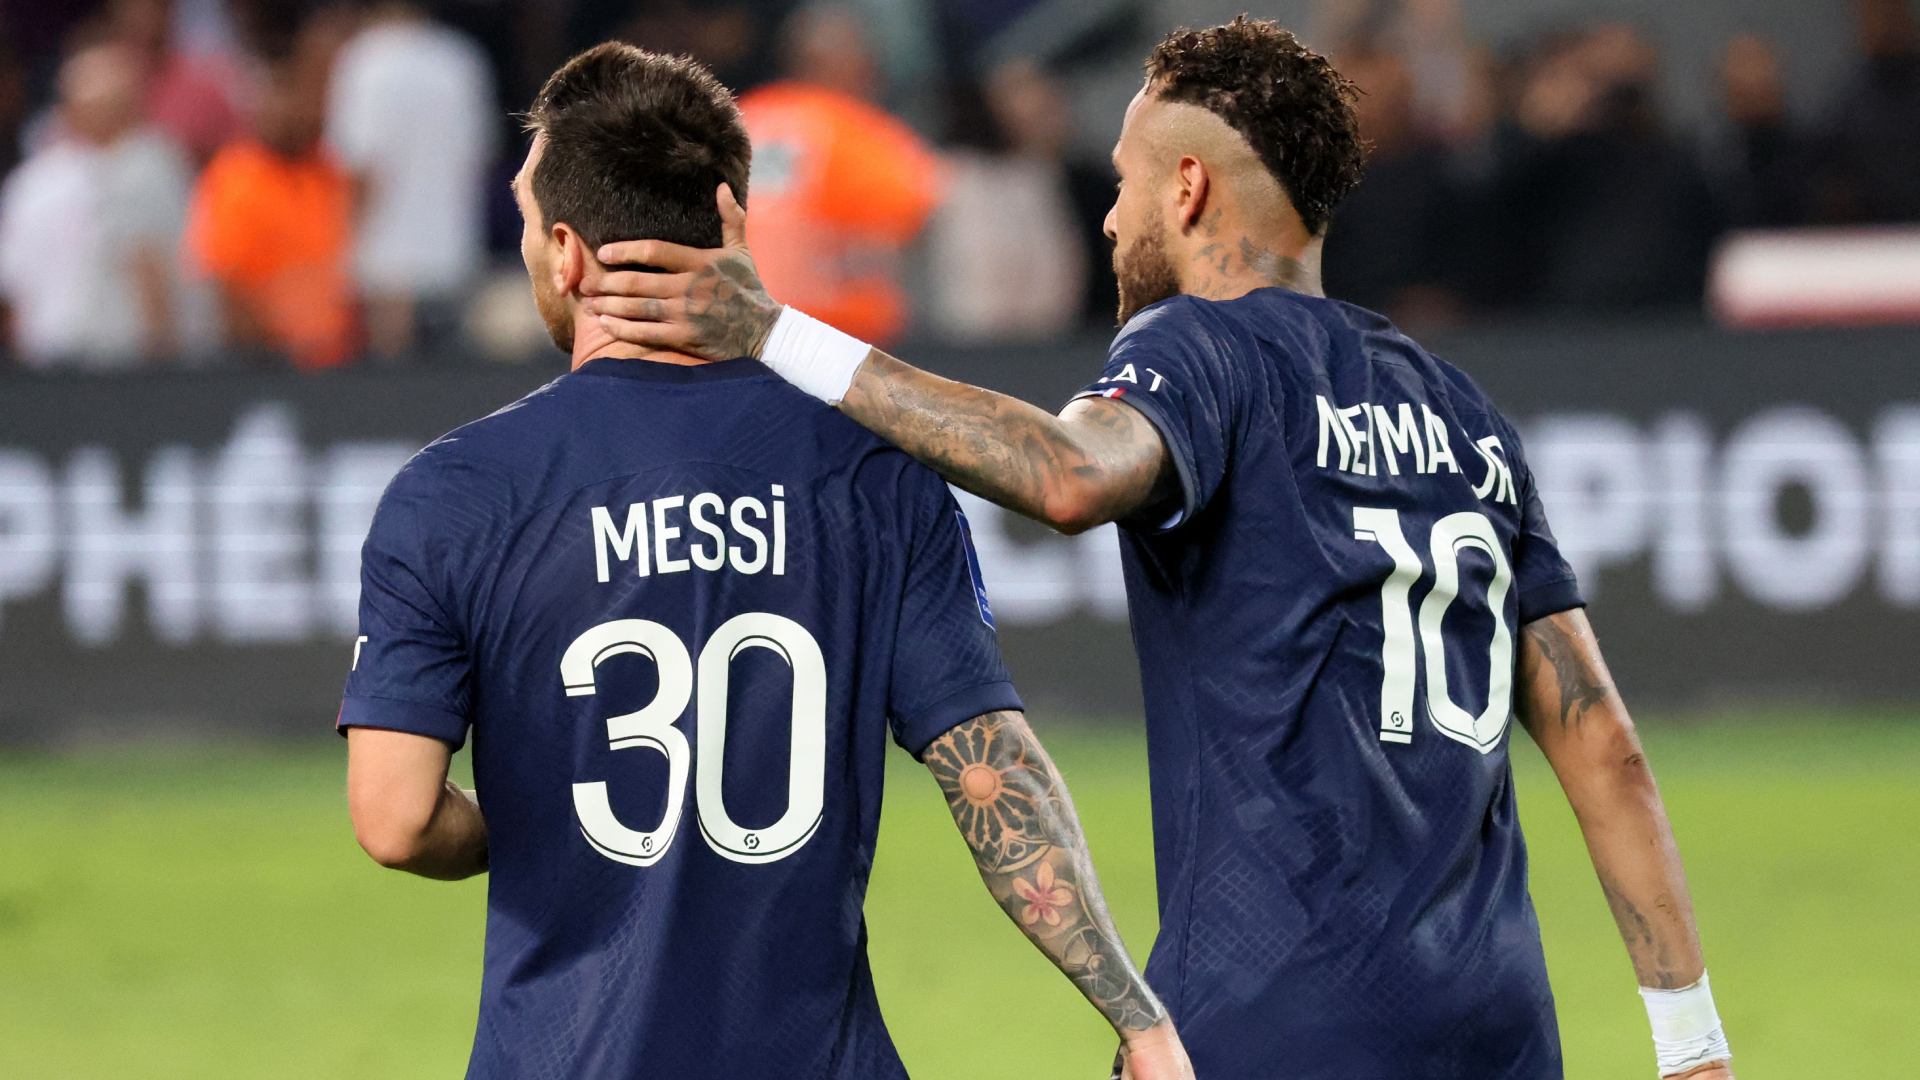 PSG vs Montpellier Live stream, TV channel, kick-off time and how to watch Goal